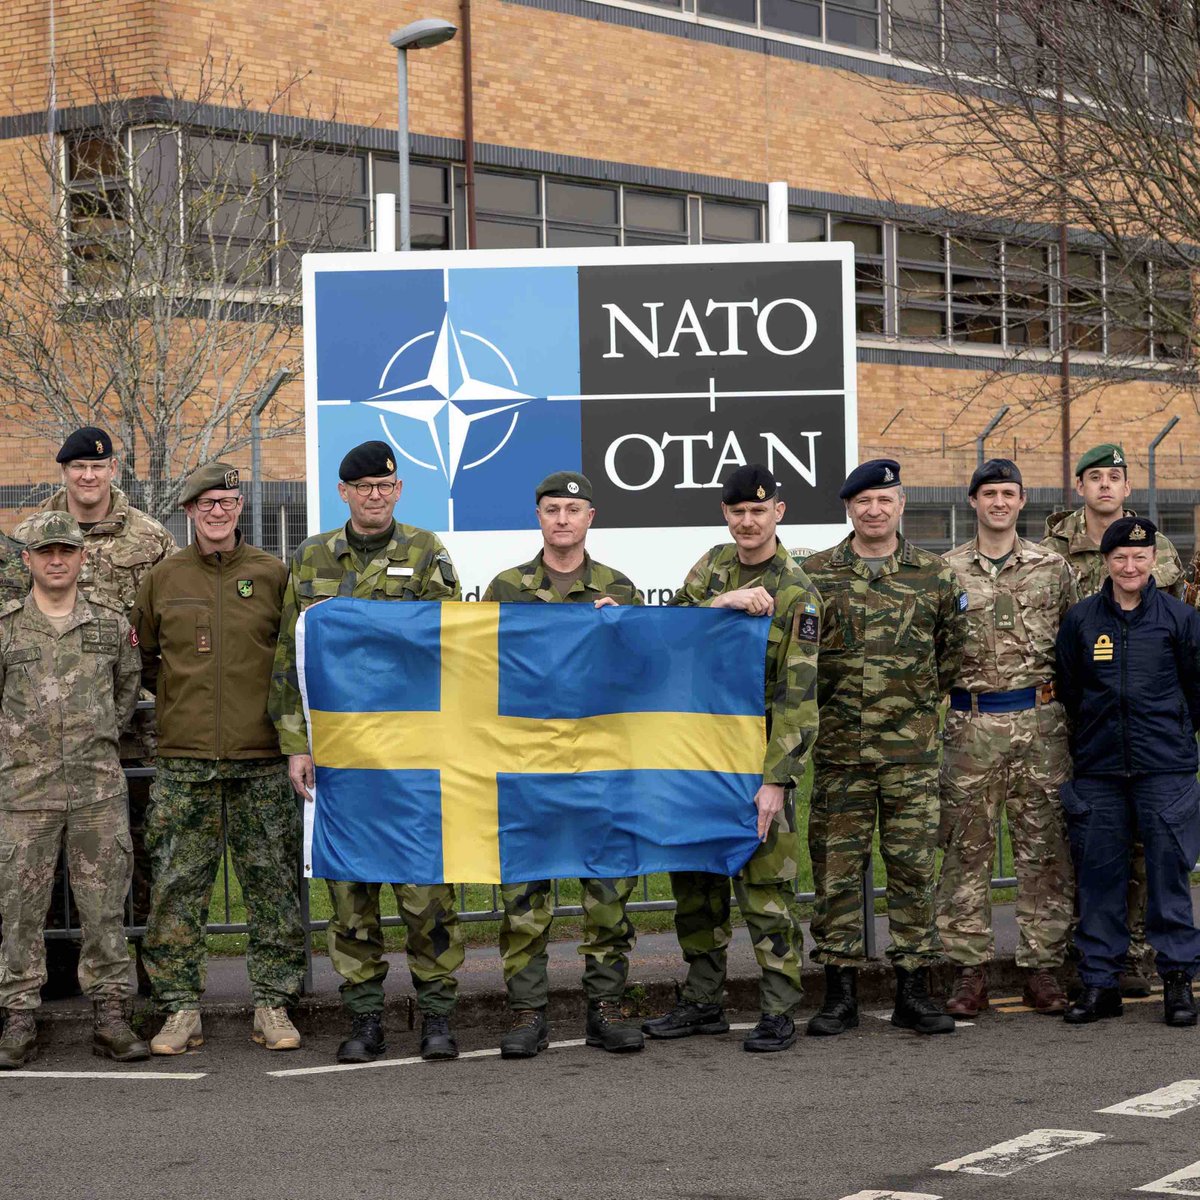 Today, hours after joining the Alliance we celebrated alongside members of the Swedish 🇸🇪 Armed Forces who were visiting our HQ. Joining #NATO is a new chapter in a friendship that has been present for many years. We are definitely #StrongerTogether